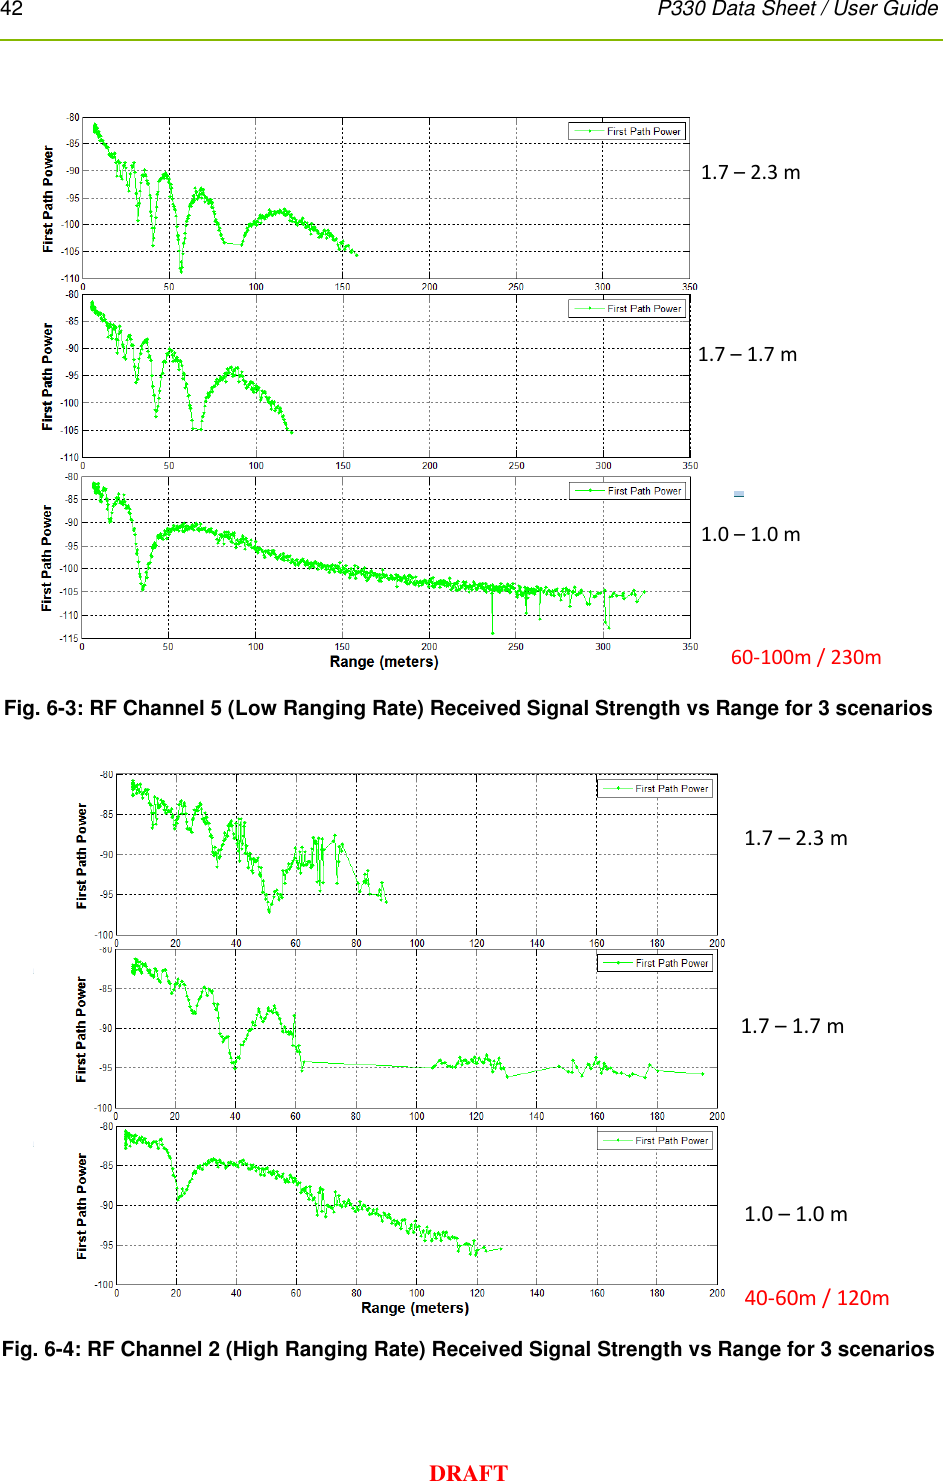 42      P330 Data Sheet / User Guide  DRAFT   Fig. 6-3: RF Channel 5 (Low Ranging Rate) Received Signal Strength vs Range for 3 scenarios   Fig. 6-4: RF Channel 2 (High Ranging Rate) Received Signal Strength vs Range for 3 scenarios  1.0 –1.0 m1.7 –1.7 m1.7 –2.3 m60-100m / 230m1.0 –1.0 m1.7 –1.7 m1.7 –2.3 m40-60m / 120m